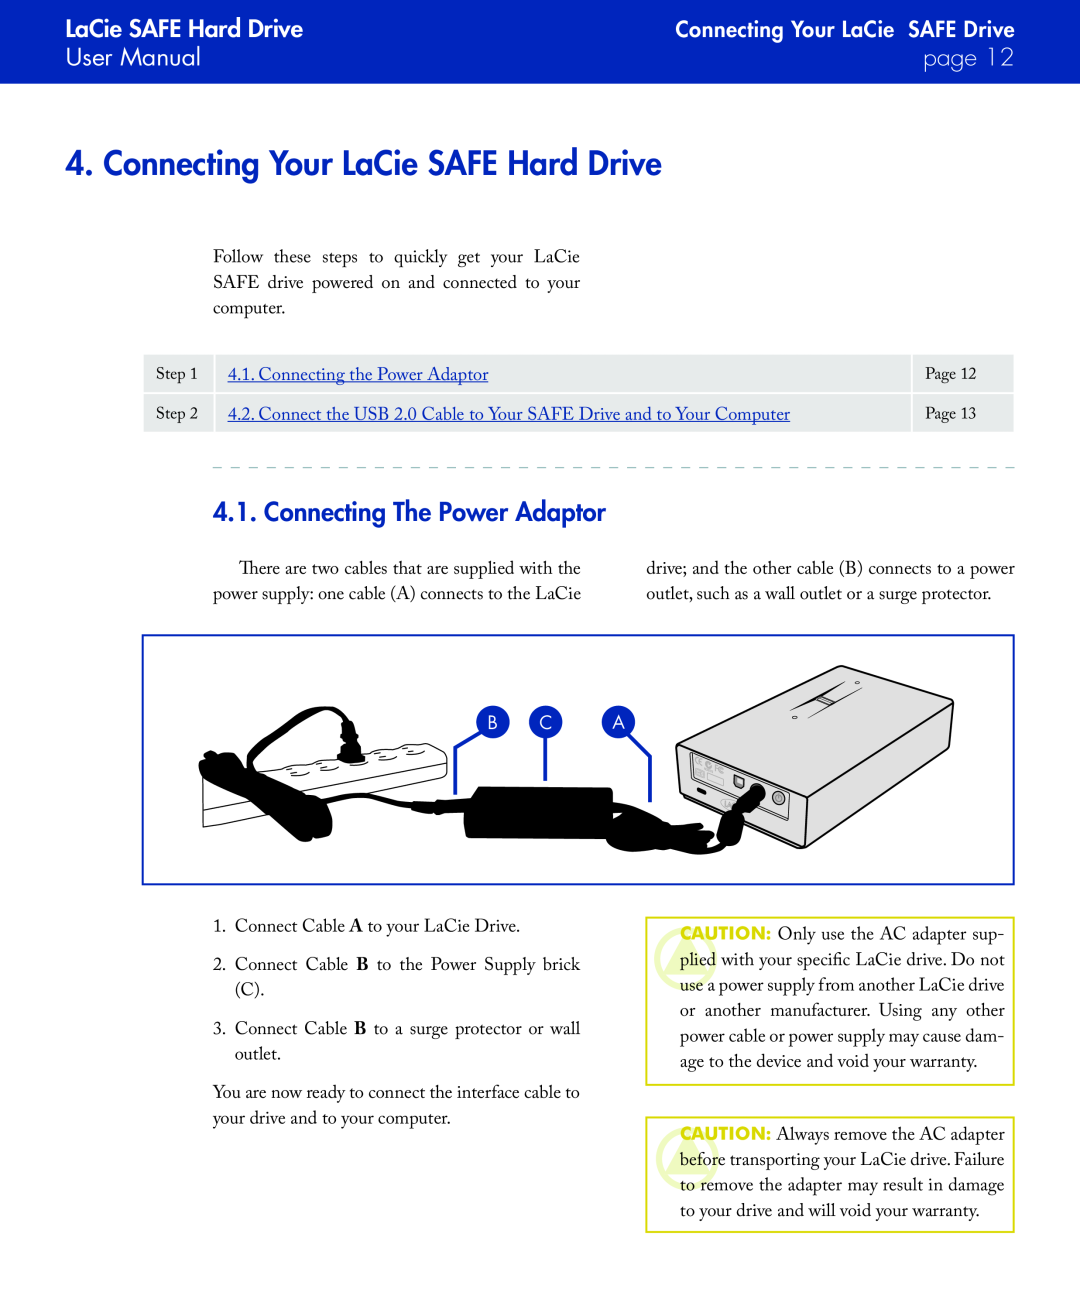 LaCie manual Connecting Your LaCie SAFE Hard Drive, Connecting The Power Adaptor, Connecting Your LaCie SAFE Drive, page 